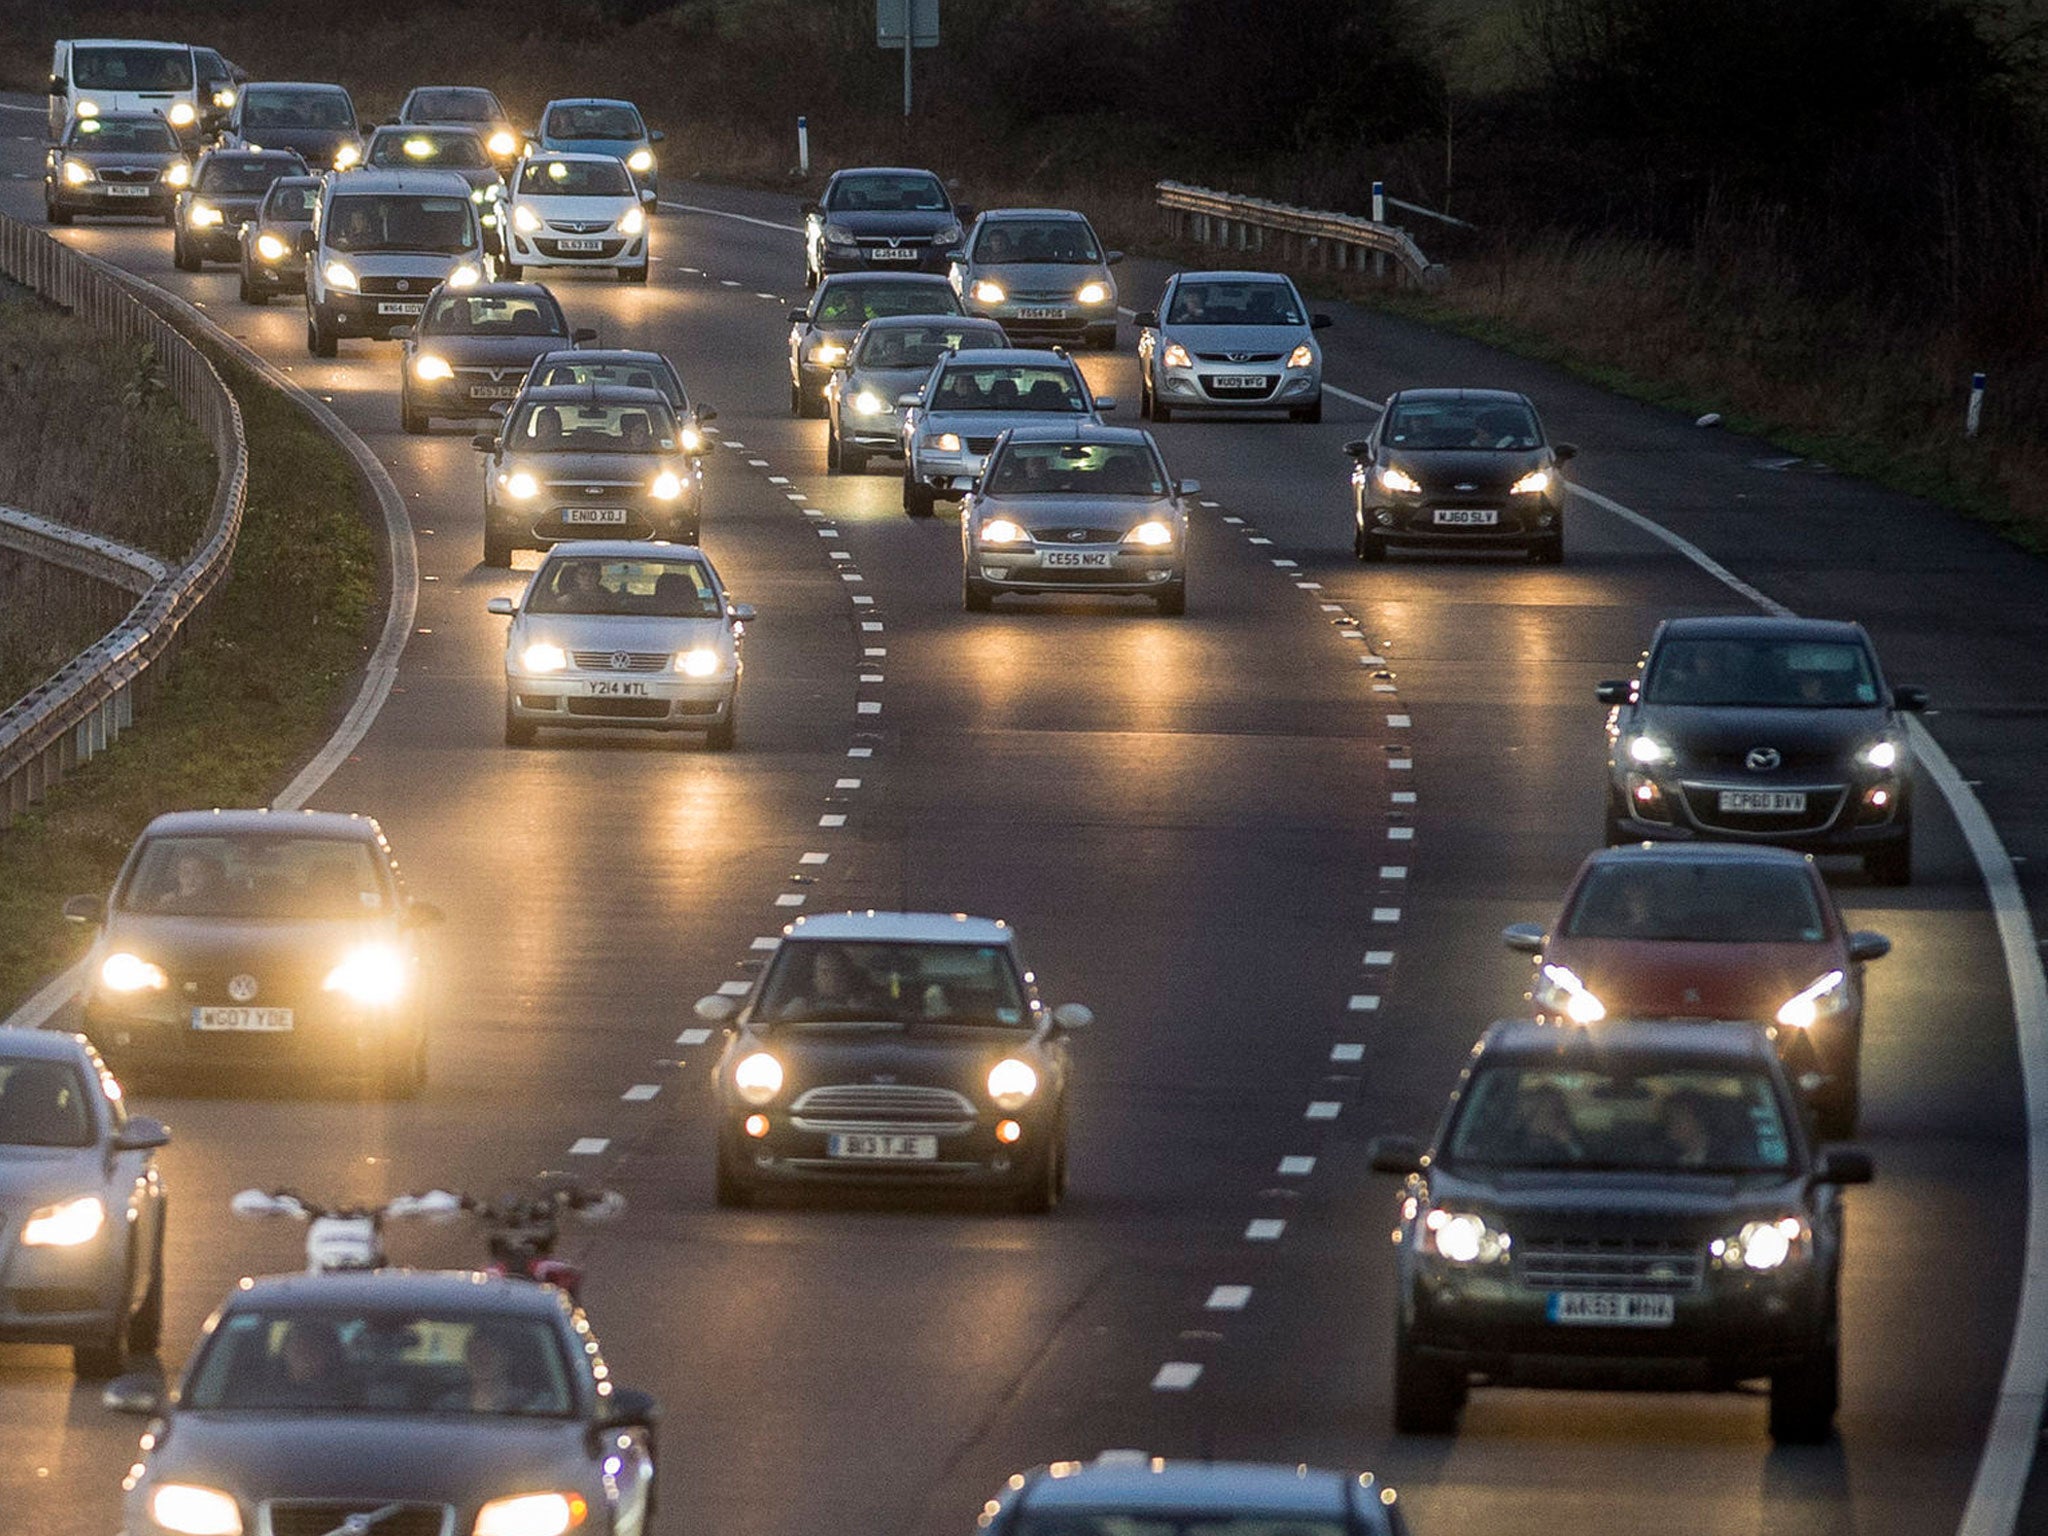 More than 100 people are killed or injured on the hard shoulder every year, police say